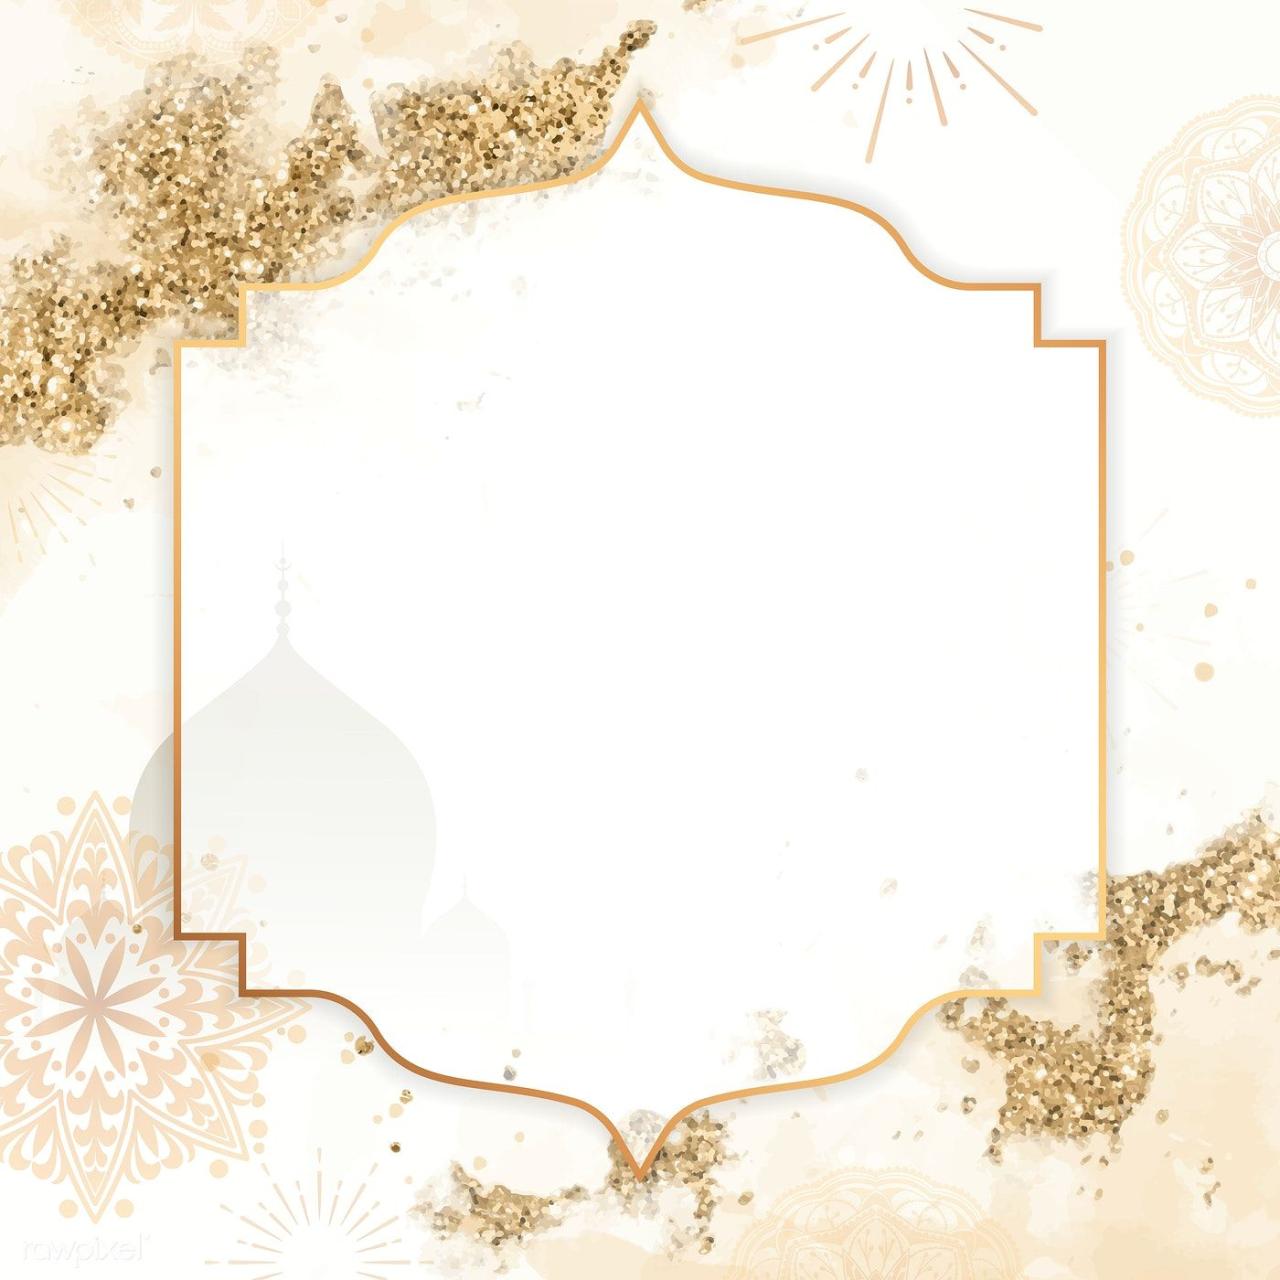 Islamic background vector mosque eps format getdrawings gooloc